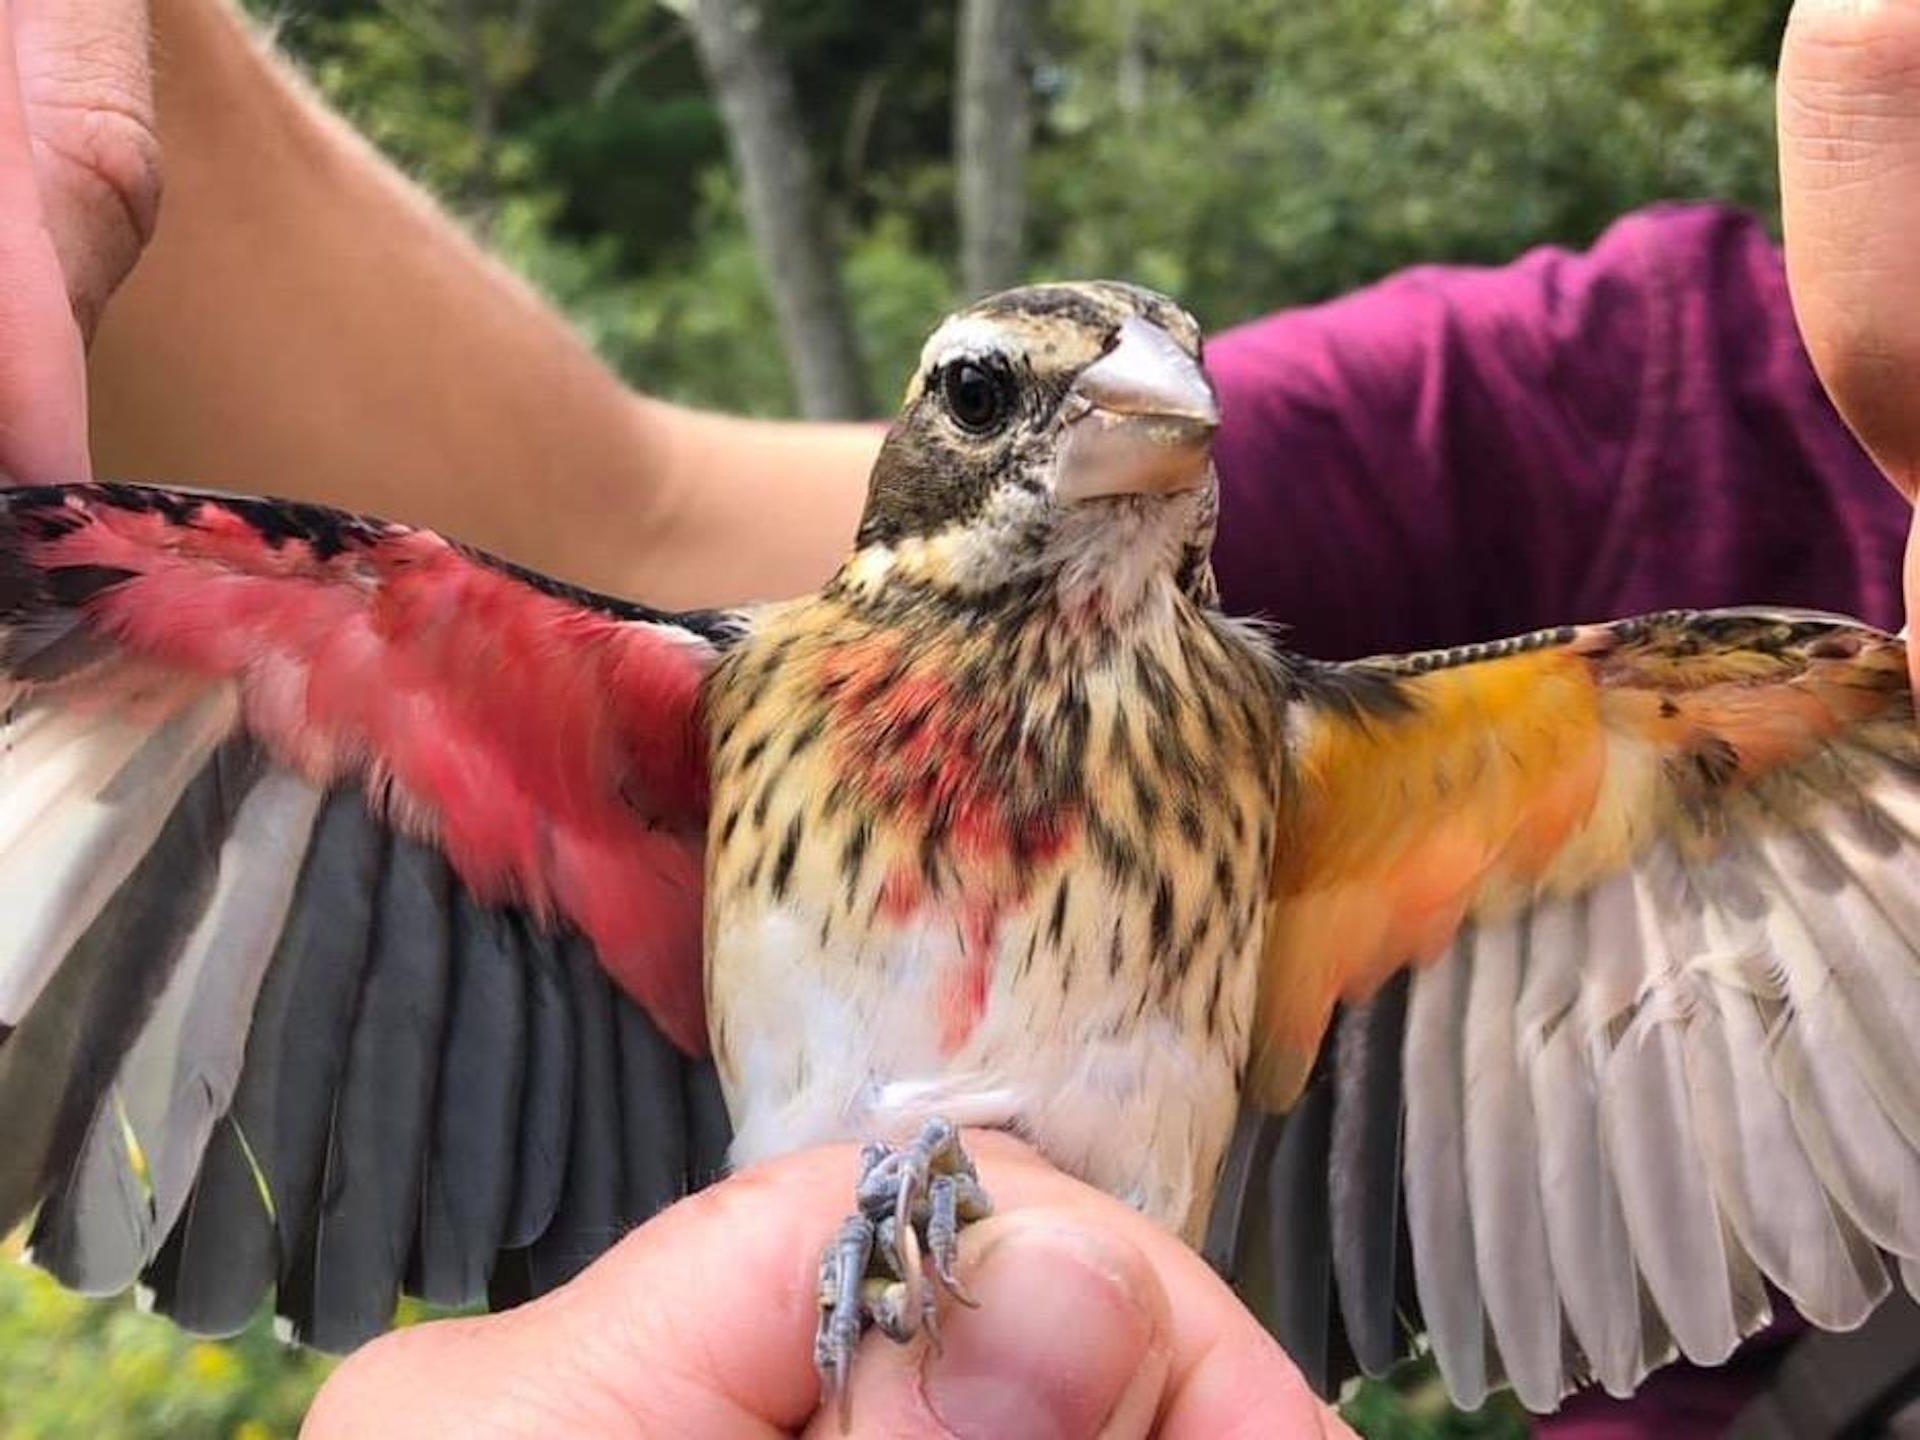 This Rose-breasted Grosbeak gynandromorph bird possesses both male and female physical traits, including different colored wing pits. Male Grosbeak have reddish pits, while females have yellow.